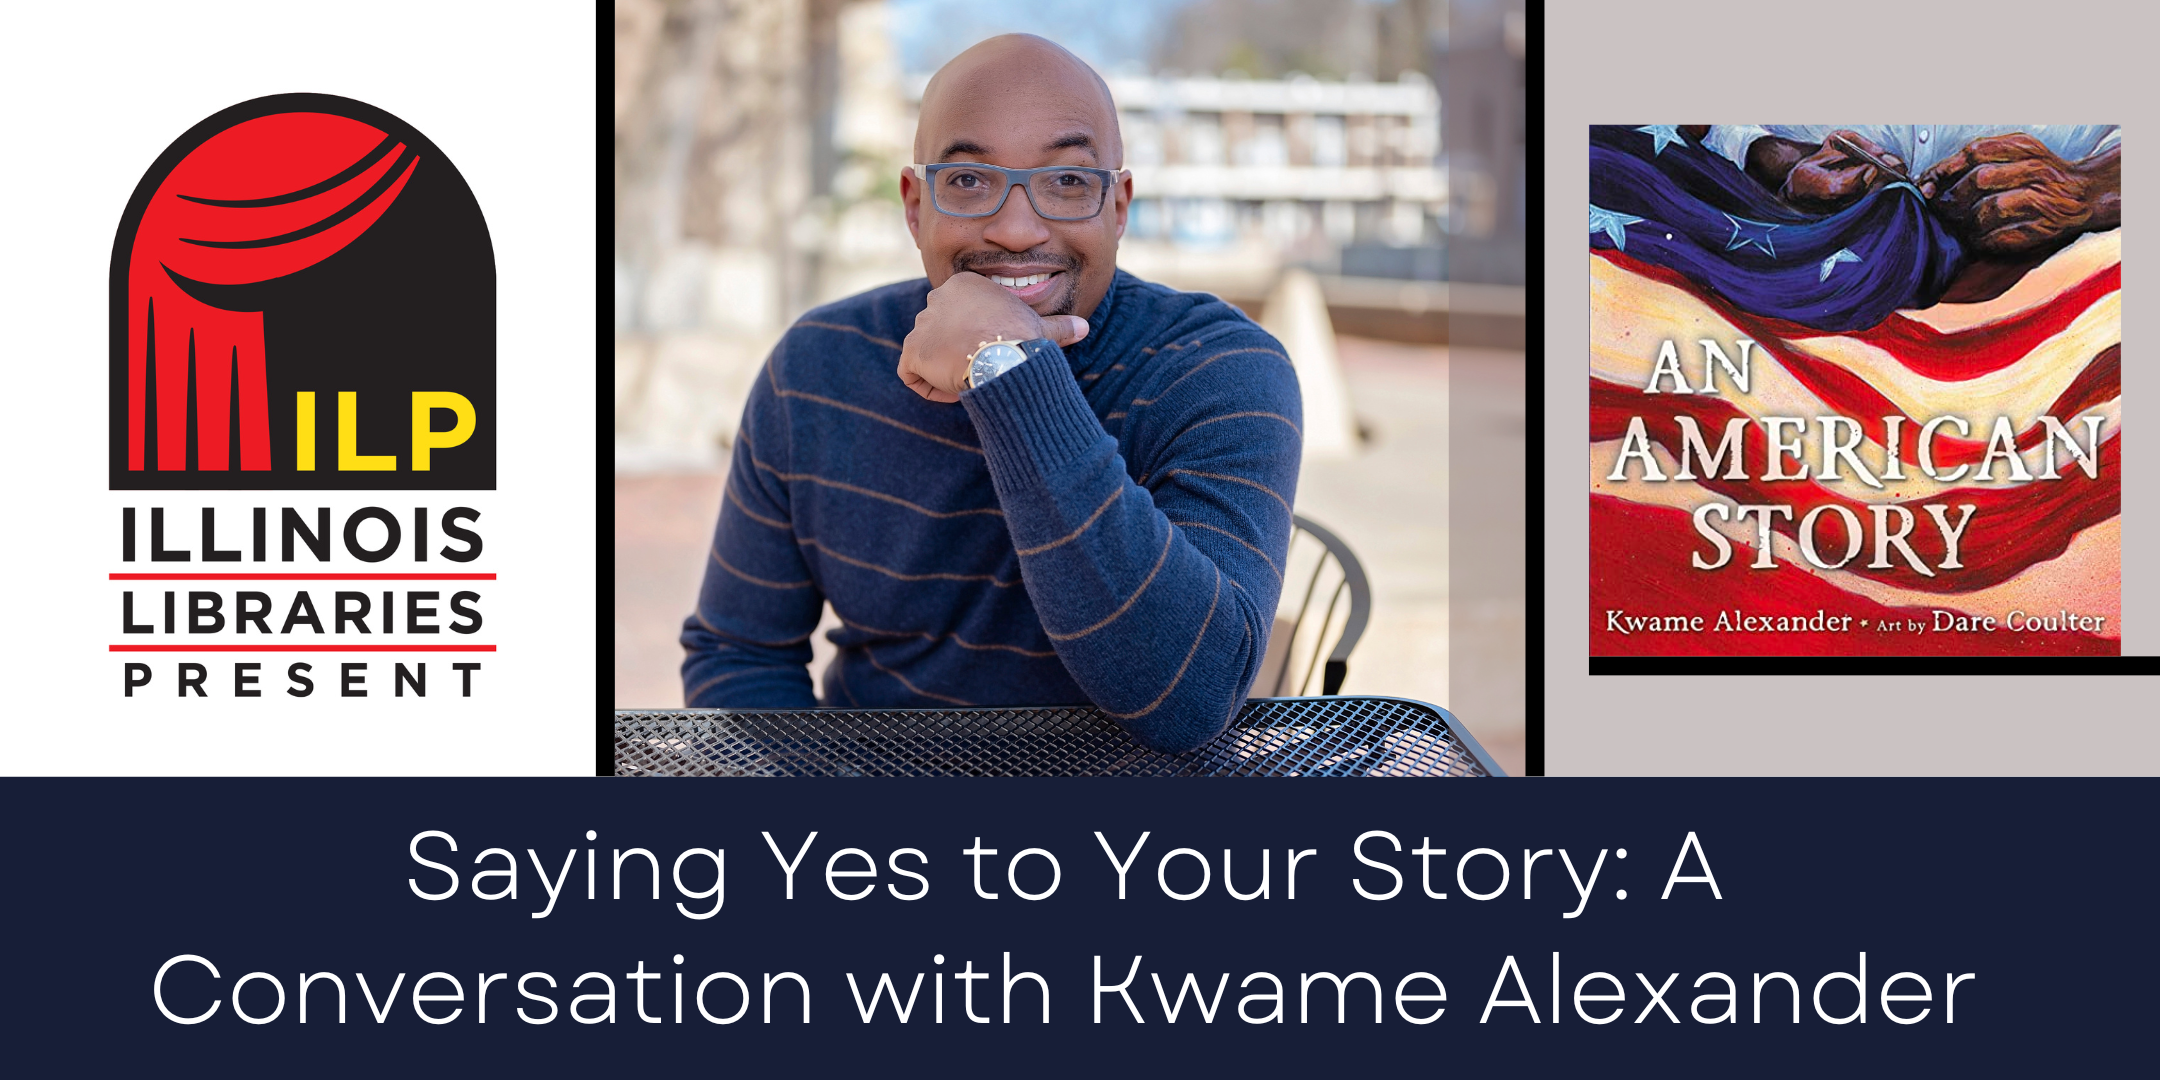 image of "Say Yes to Your Story: A Conversation with Kwame Alexander"